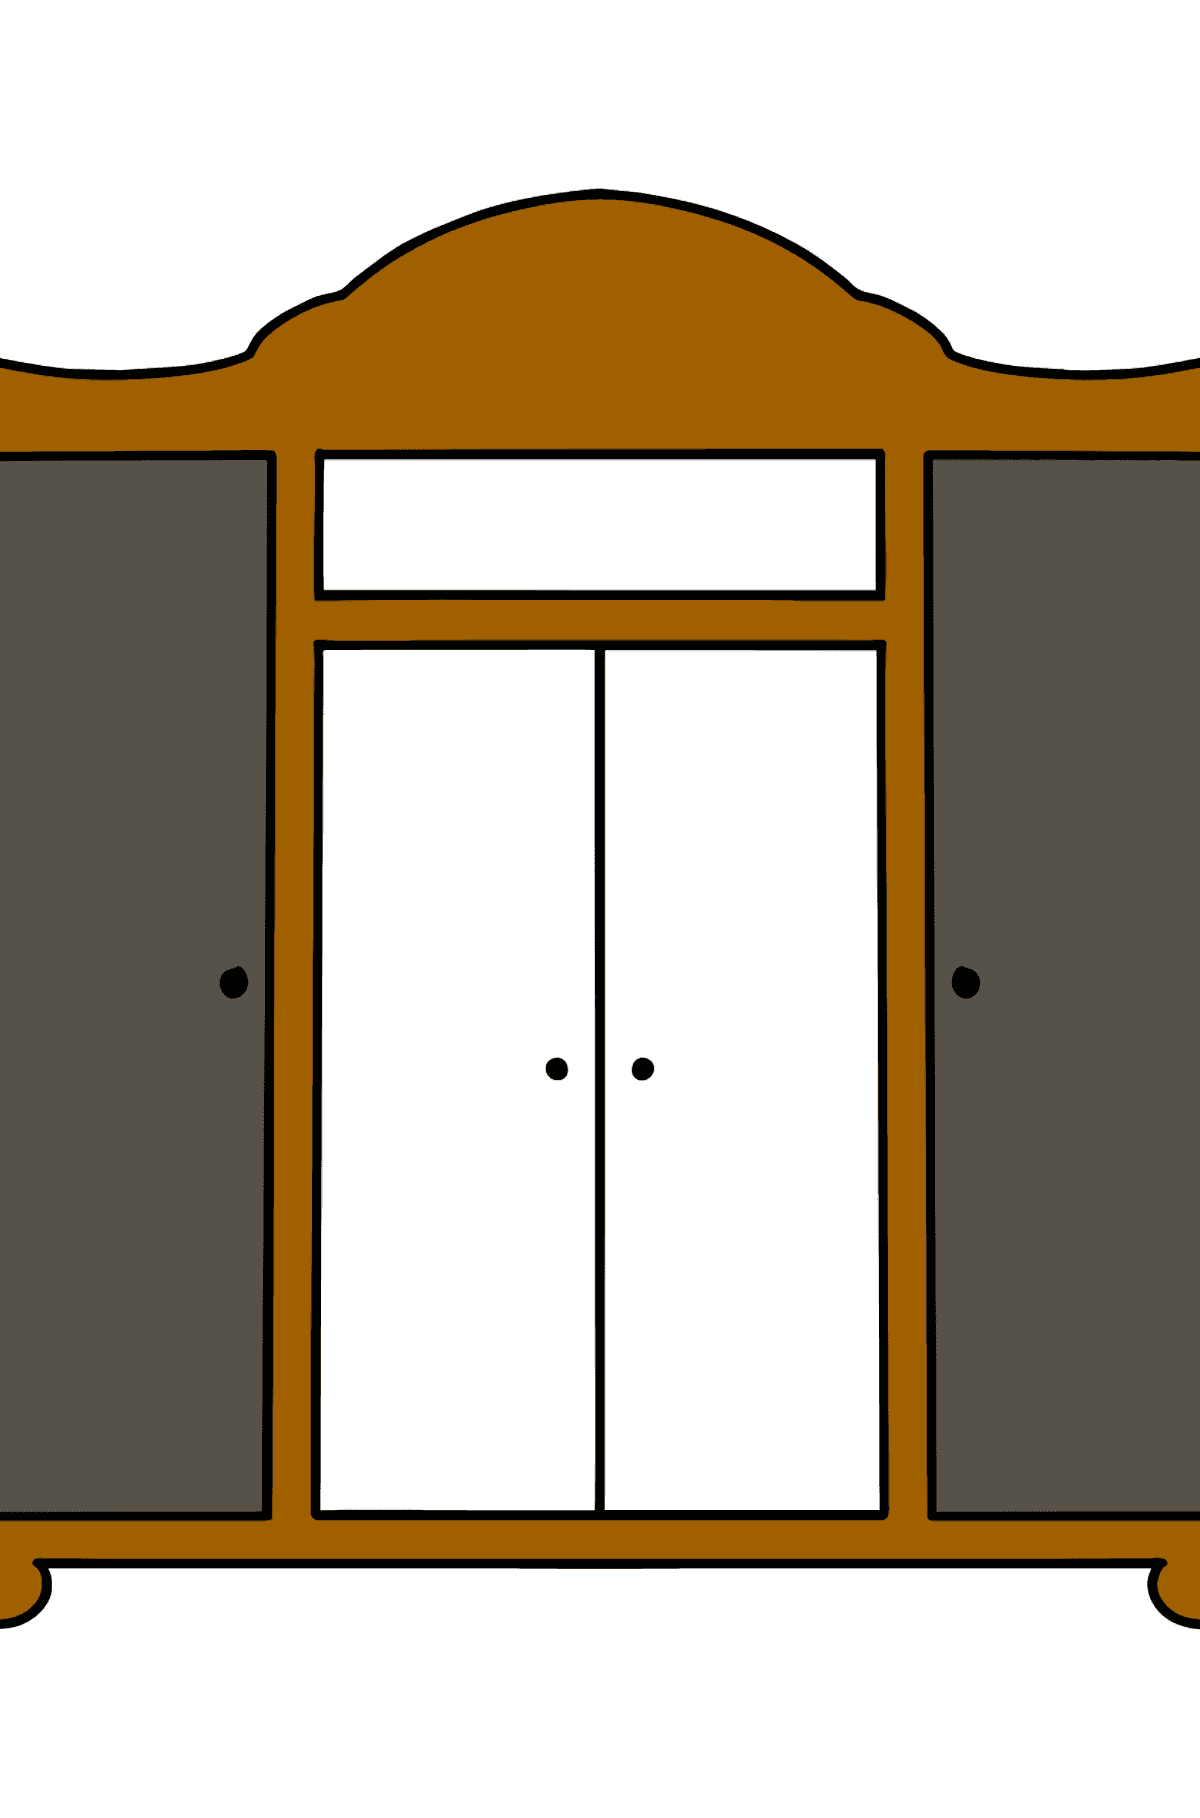 Wardrobe coloring page - Coloring Pages for Kids